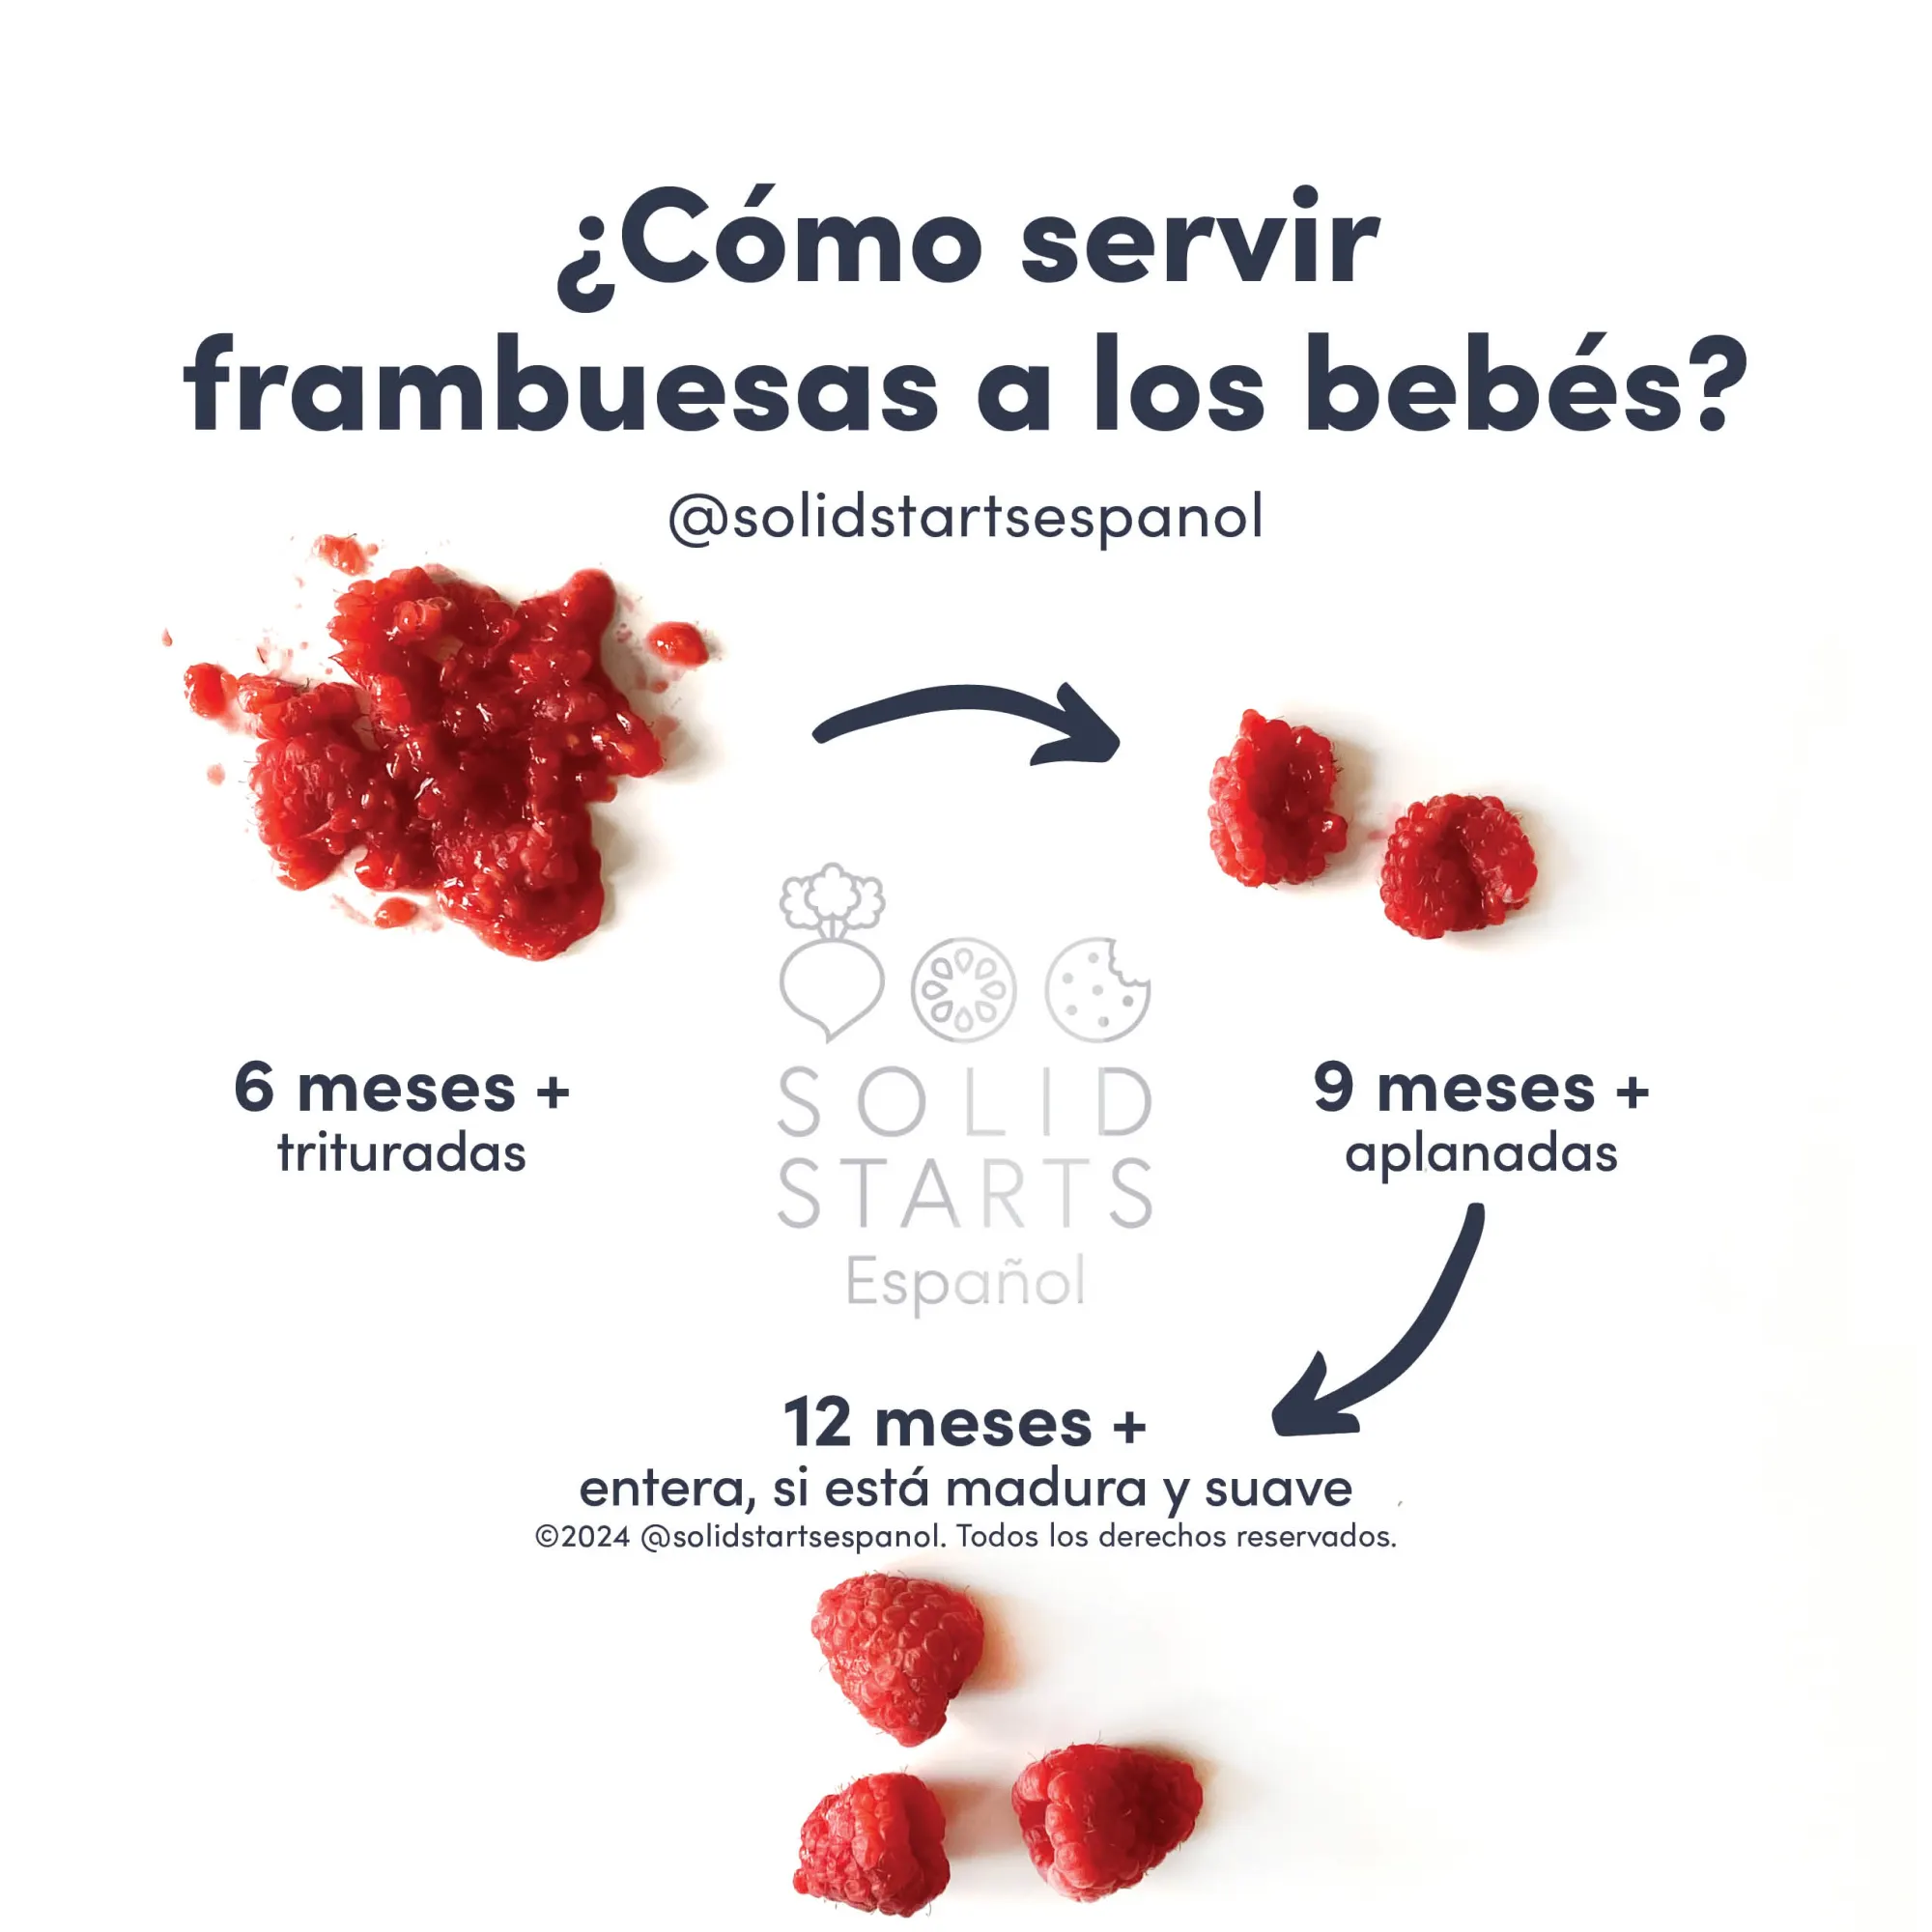 an infographic showing how to serve raspberries to babies: smashed or flattened for babies 6 months+, flattened for babies 9 months+, whole, if ripe and soft, for toddlers 12 months+